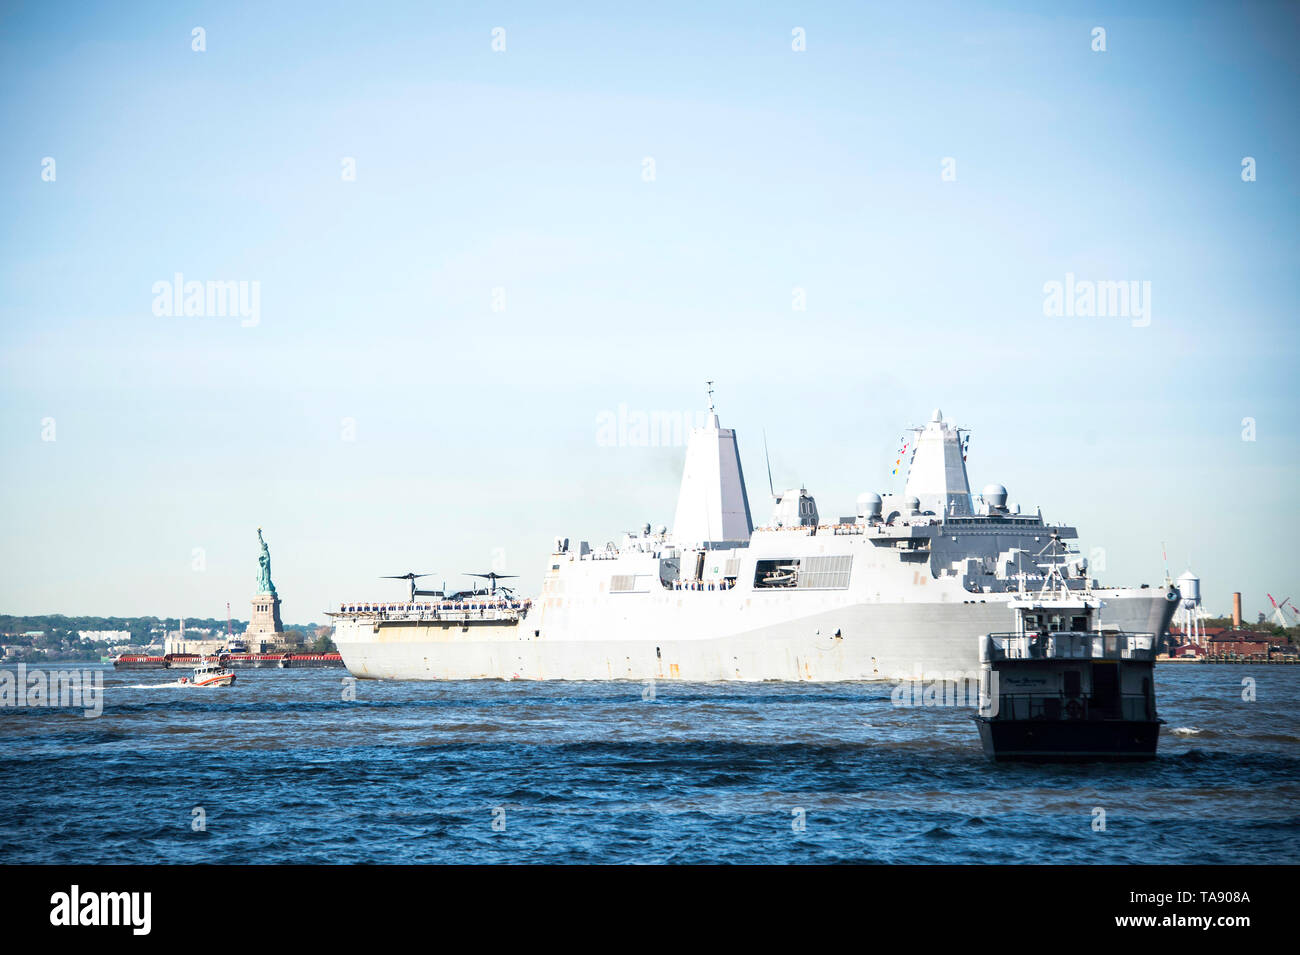 190522-N-XQ474-0004 NEW YORK (May 22, 2019) The San Antonio-class amphibious transport dock USS New York (LPD 21) transits the Hudson River en route to a pier in Manhattan during Fleet Week New York. Fleet Week New York, now in its 31st year, is the city's time-honored celebration of the sea services. It is an unparalleled opportunity for the citizens of New York and the surrounding tri-state area to meet Sailors, Marines and Coast Guardsmen, as well as witness firsthand the latest capabilities of today's maritime services. (U.S. Navy photo by Mass Communication Specialist 2nd Class Andrew Sch Stock Photo